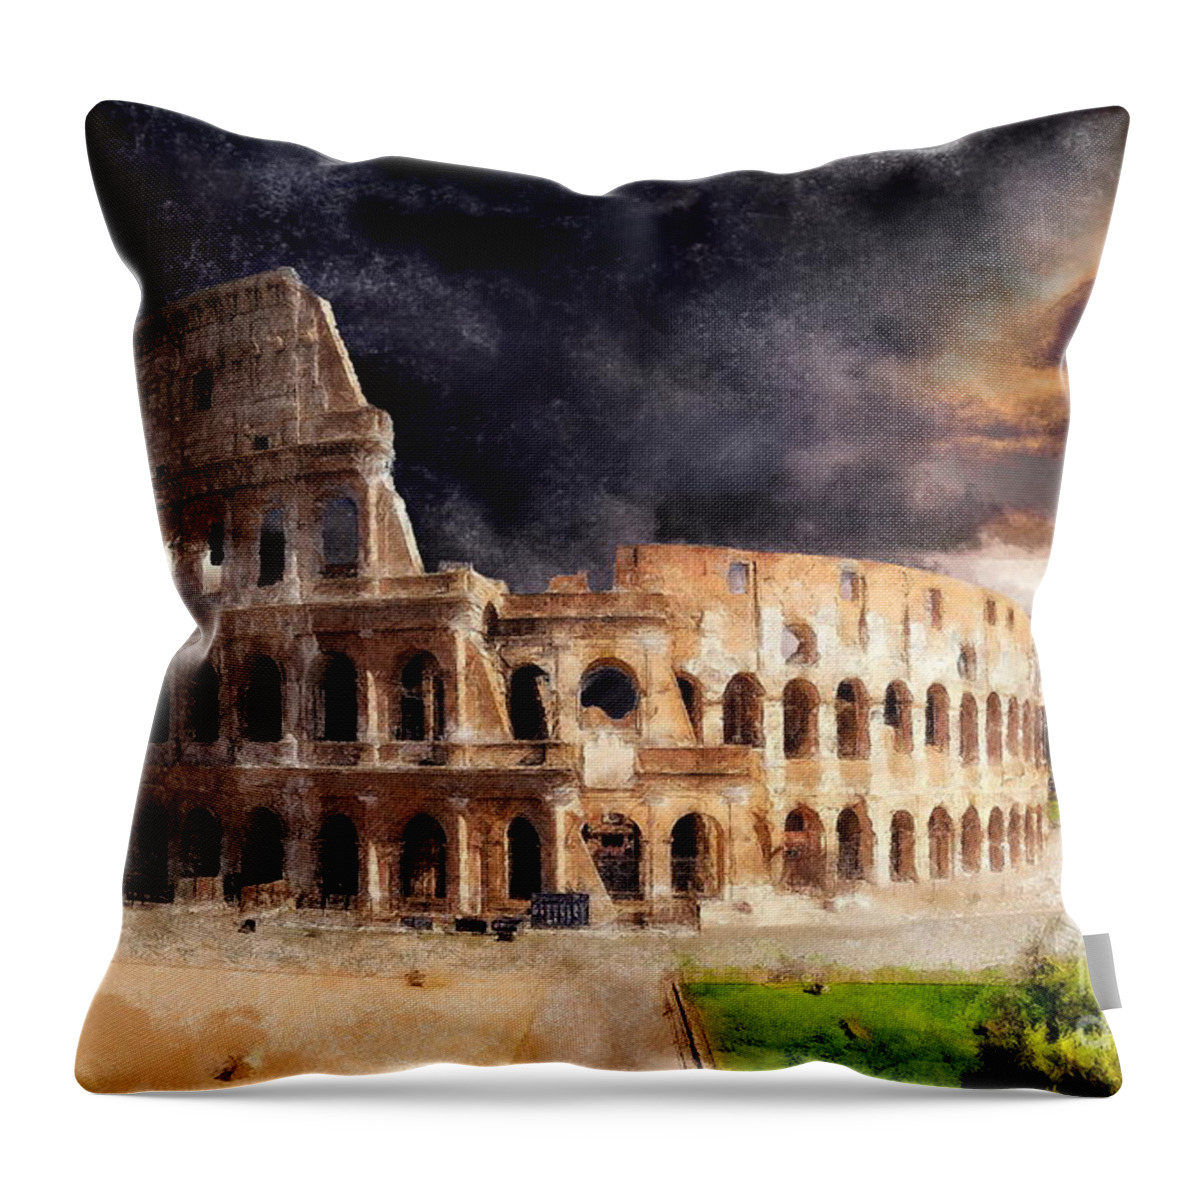 Colosseum Throw Pillow featuring the digital art The Colosseum - storm by Jerzy Czyz